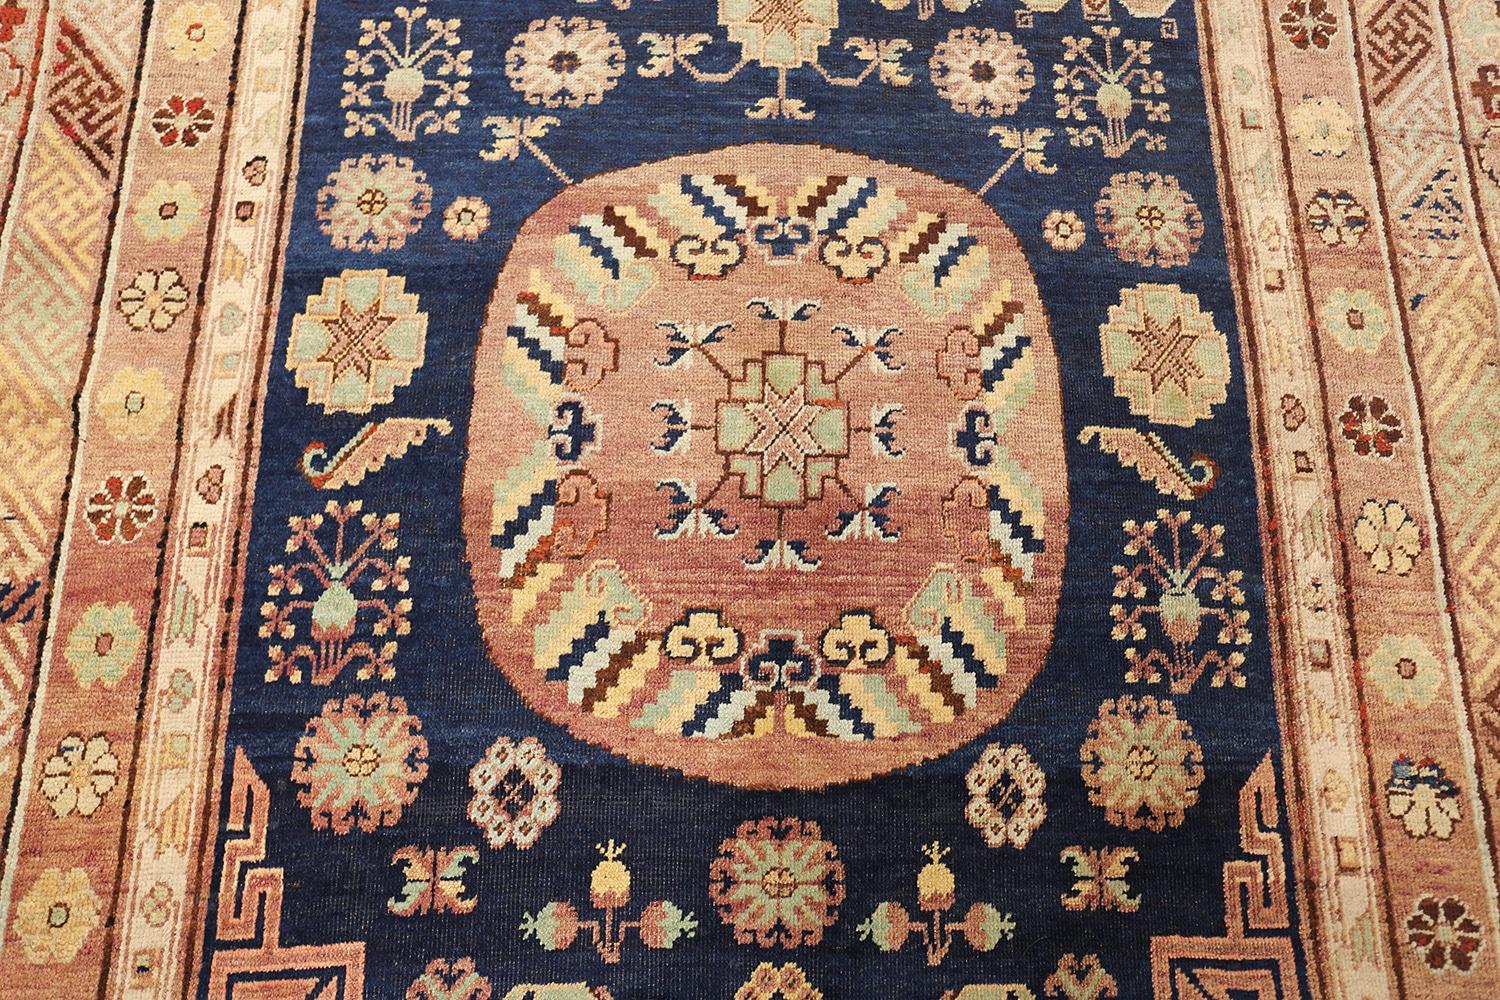 Hand-Knotted Antique Khotan Carpet from East Turkestan. 5 ft 5 in x 11 ft For Sale